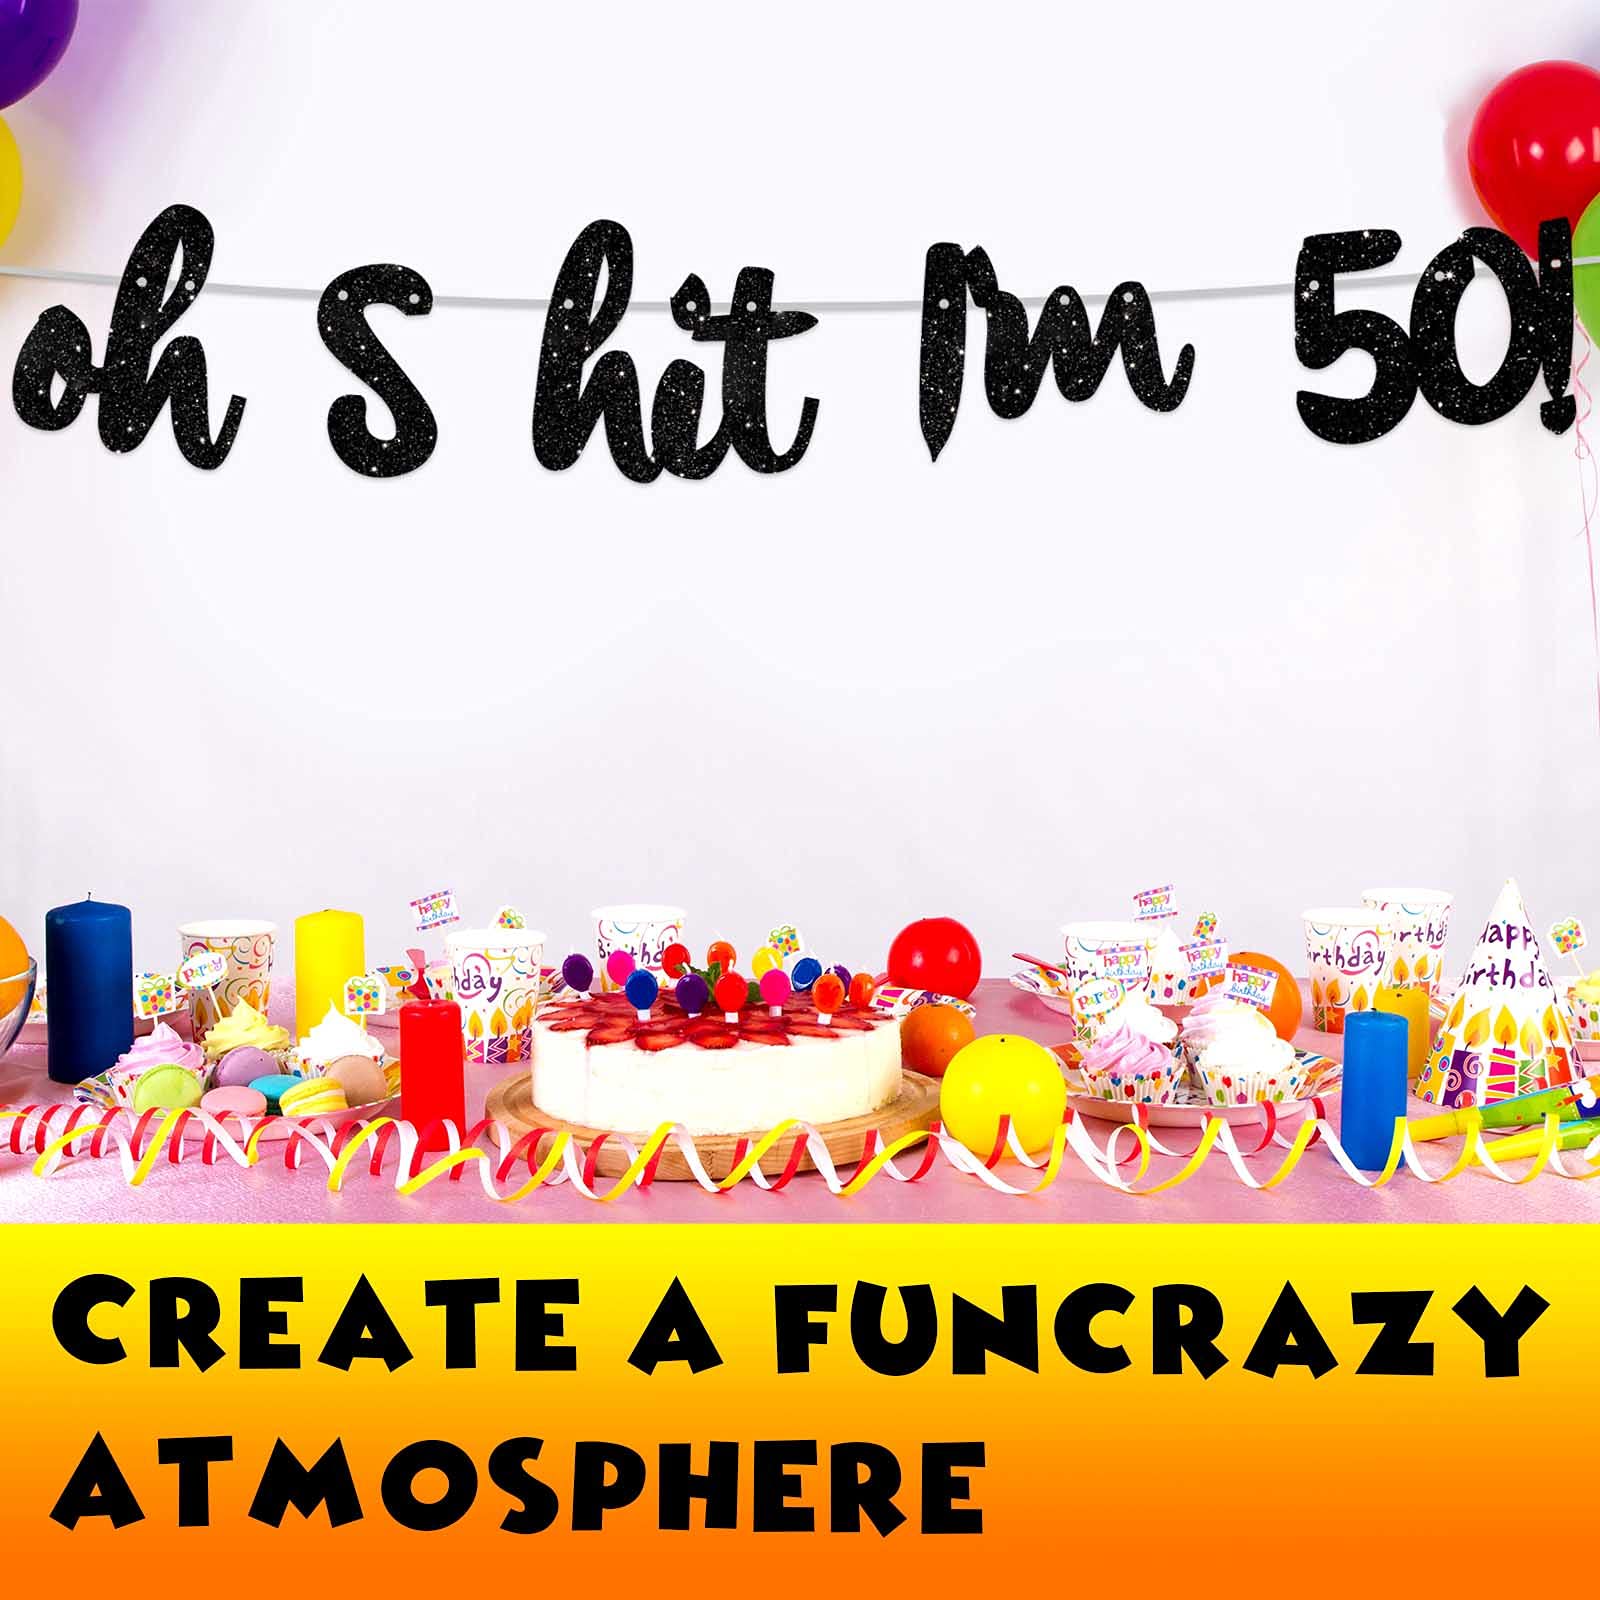 Oh I’m 50! Banner Backdrop Glitter Black Hallo Fifty Cheers to 50 Years Old Theme Decor for Man Woman Happy 50th Birthday Party Photo Studio Prop Flag Decorations Favors Supplies